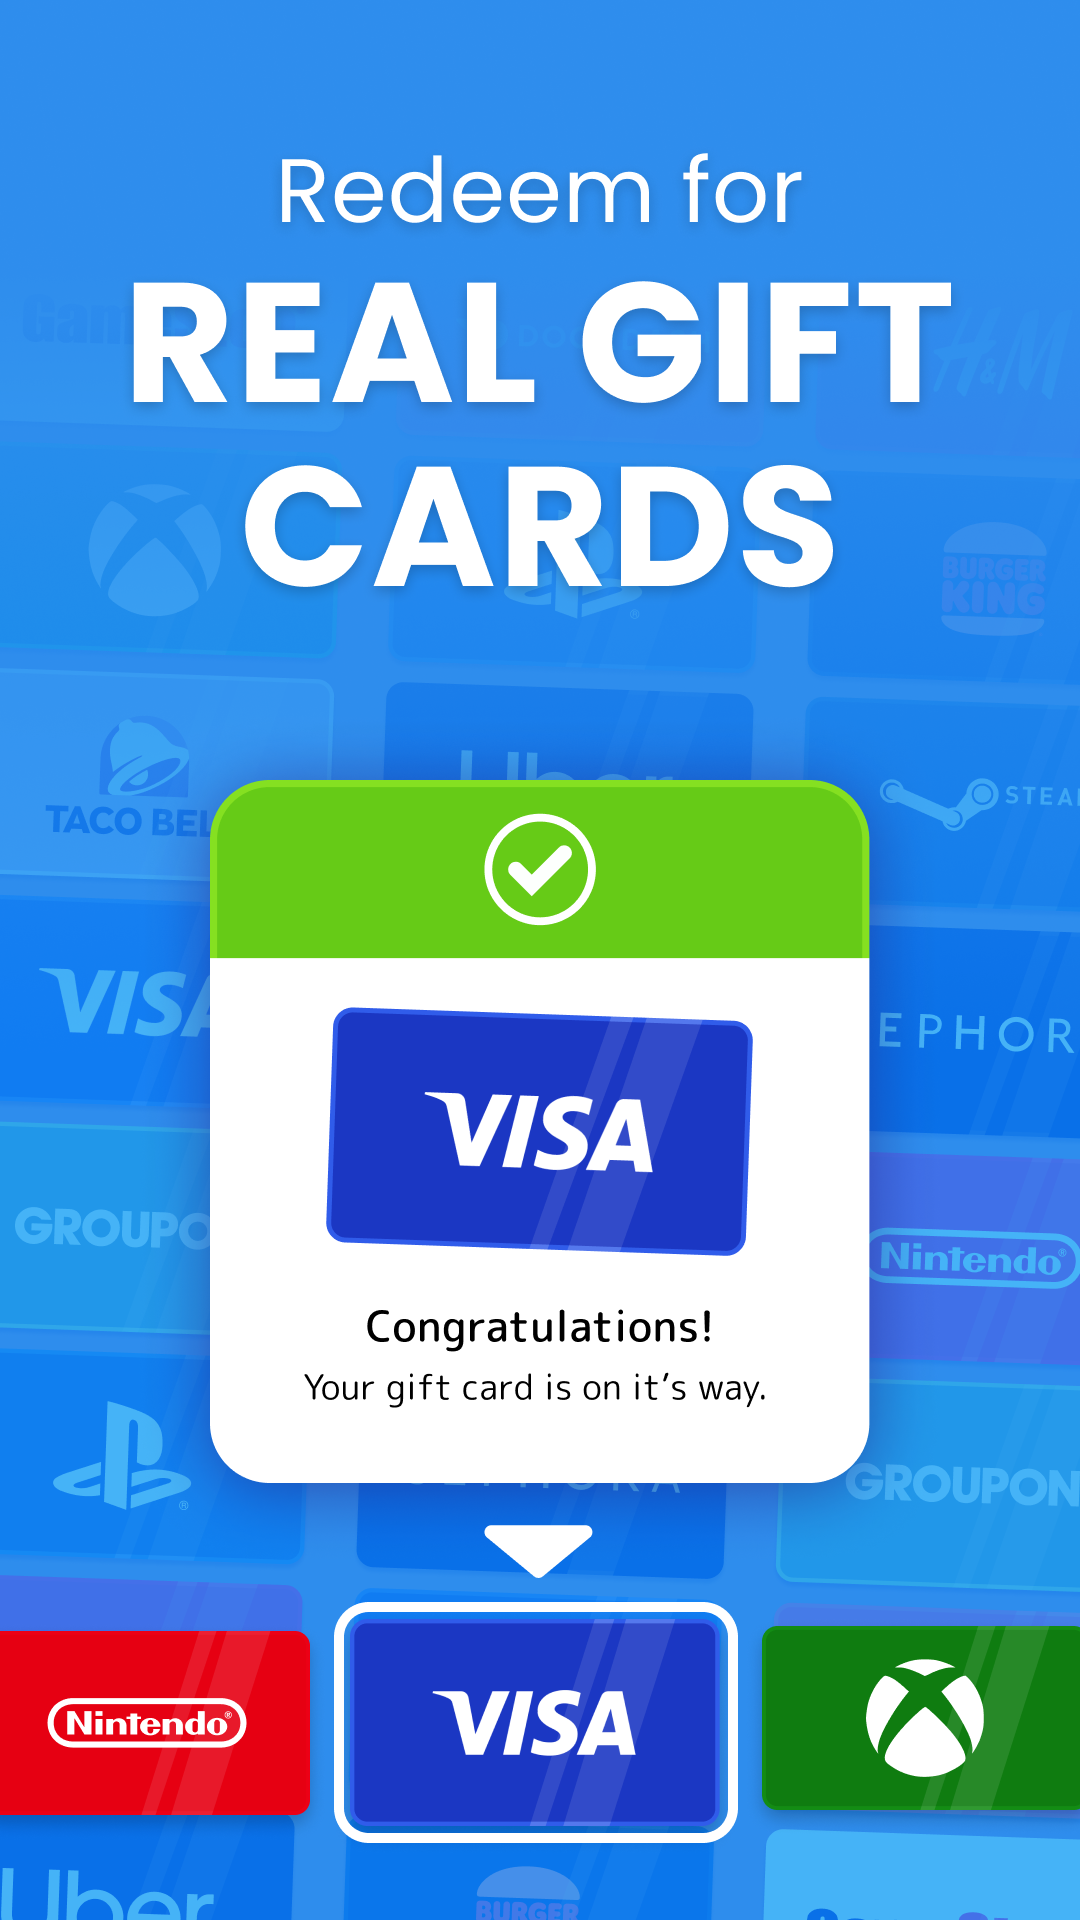 Download MISTPLAY: Gift Cards & Rewards For Playing Games on PC with MEmu